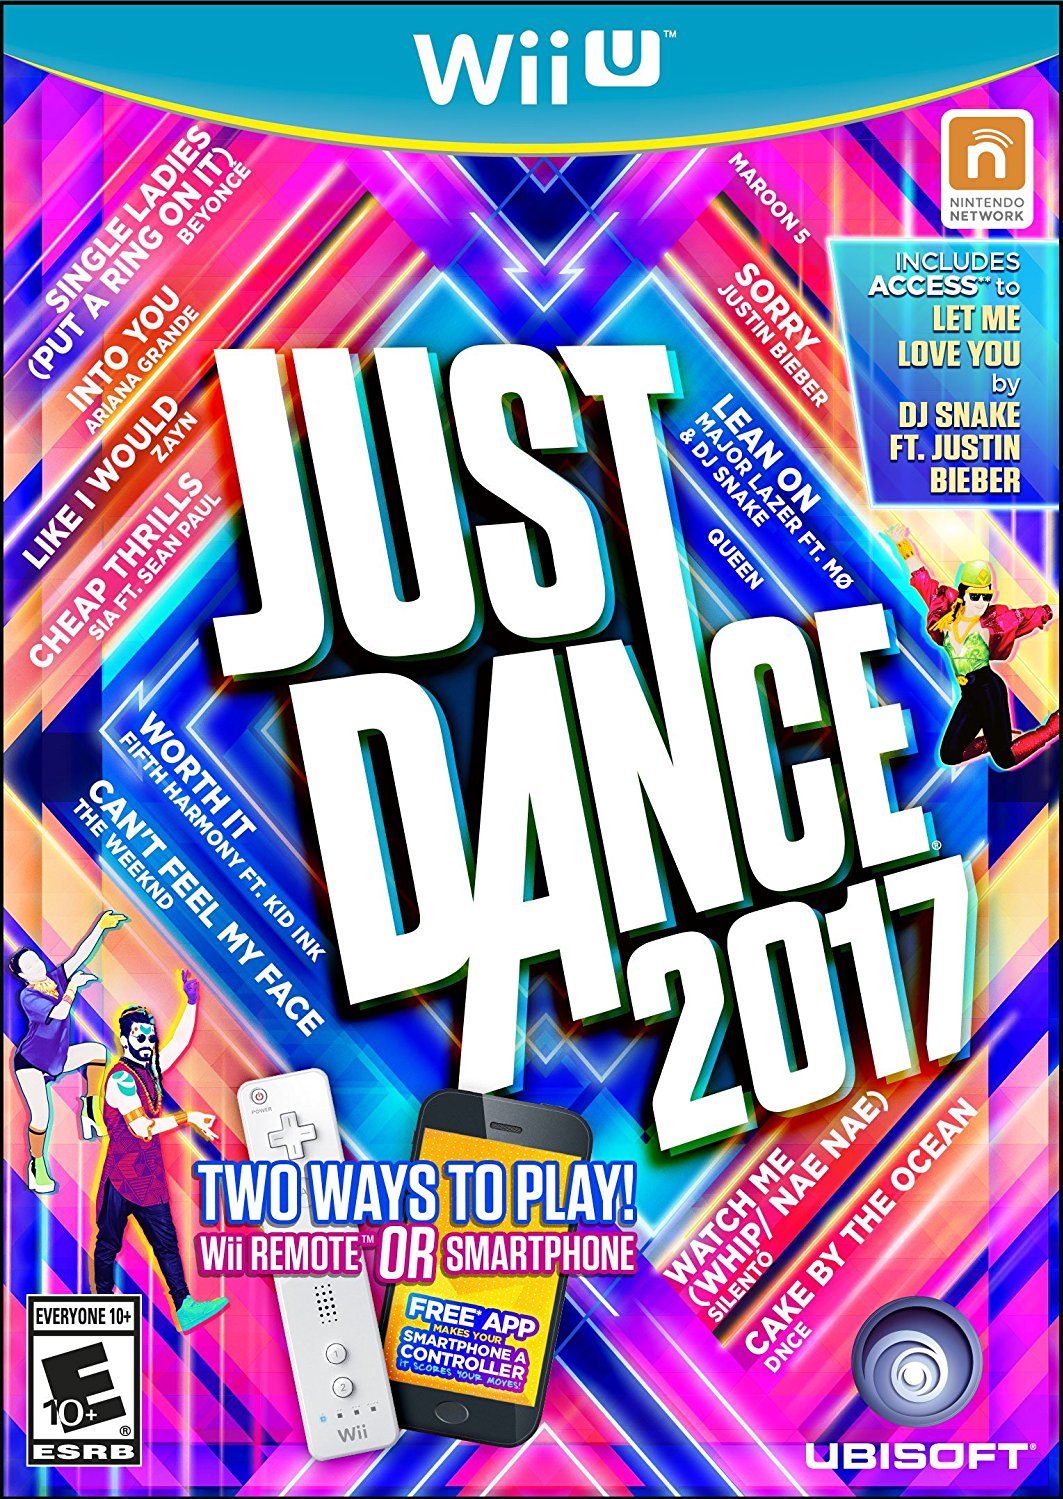 Just Dance 2017 video game